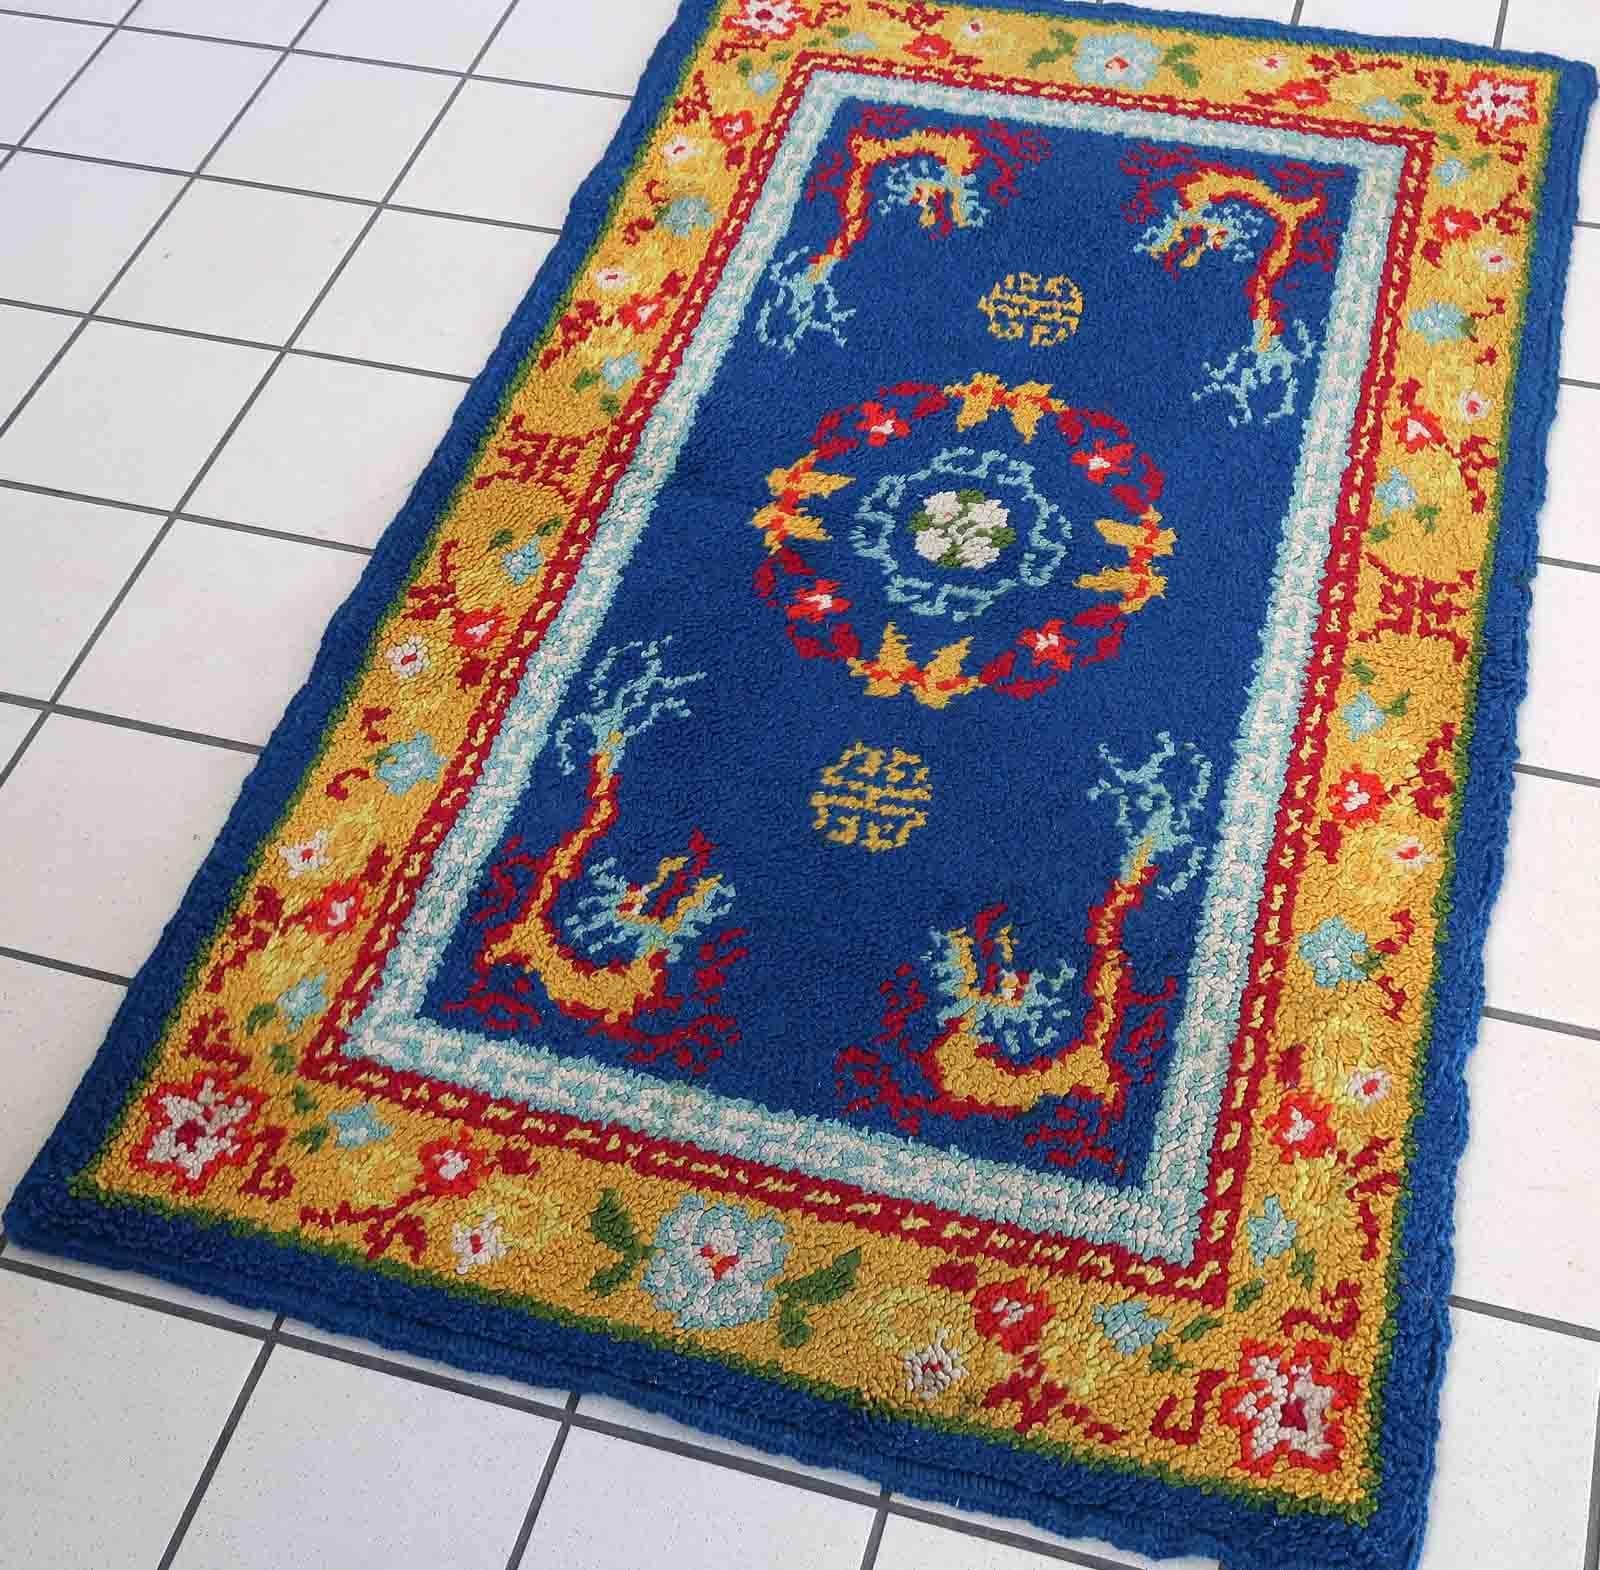 Woven Vintage French Savonnerie Rug, 1960s, 1C840 For Sale